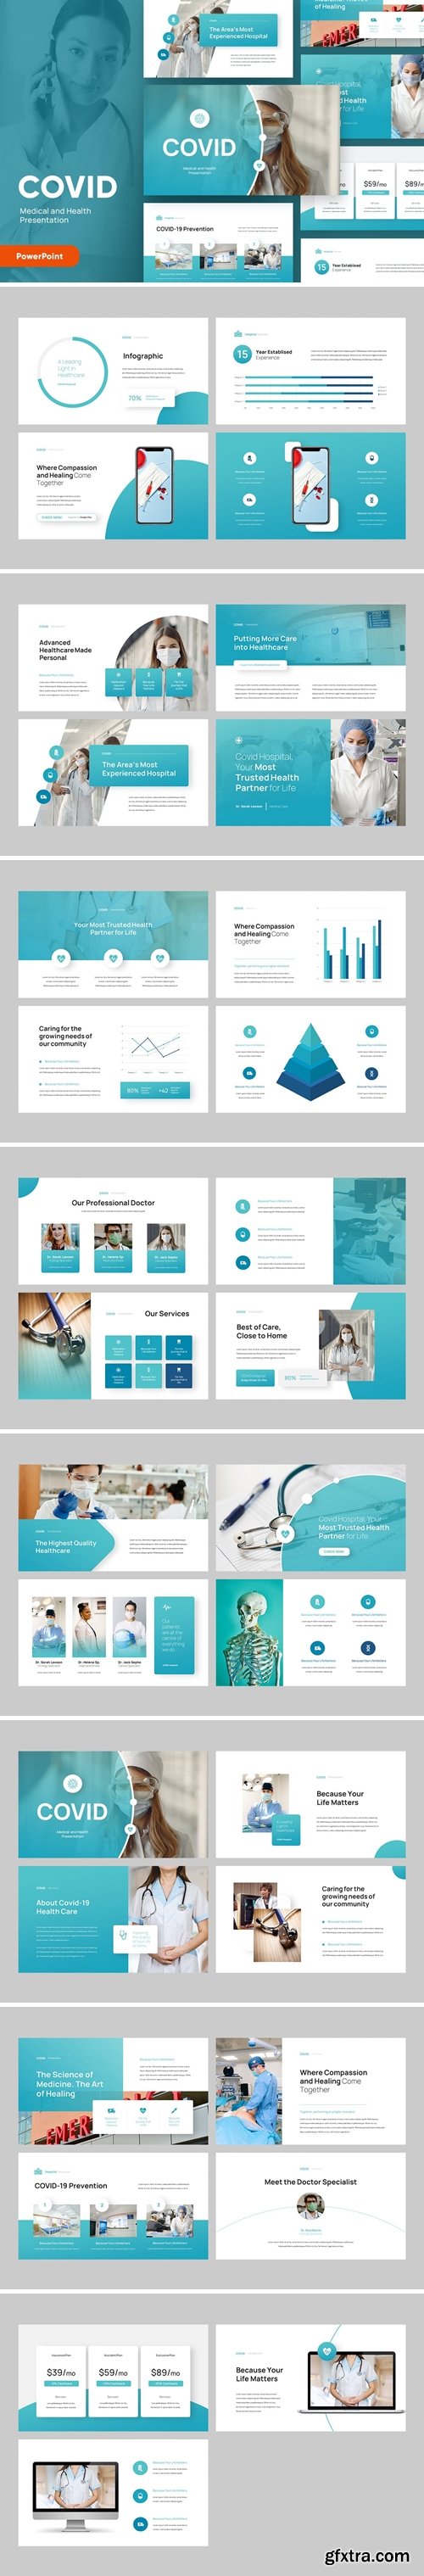 COVID - Medical Powerpoint Template